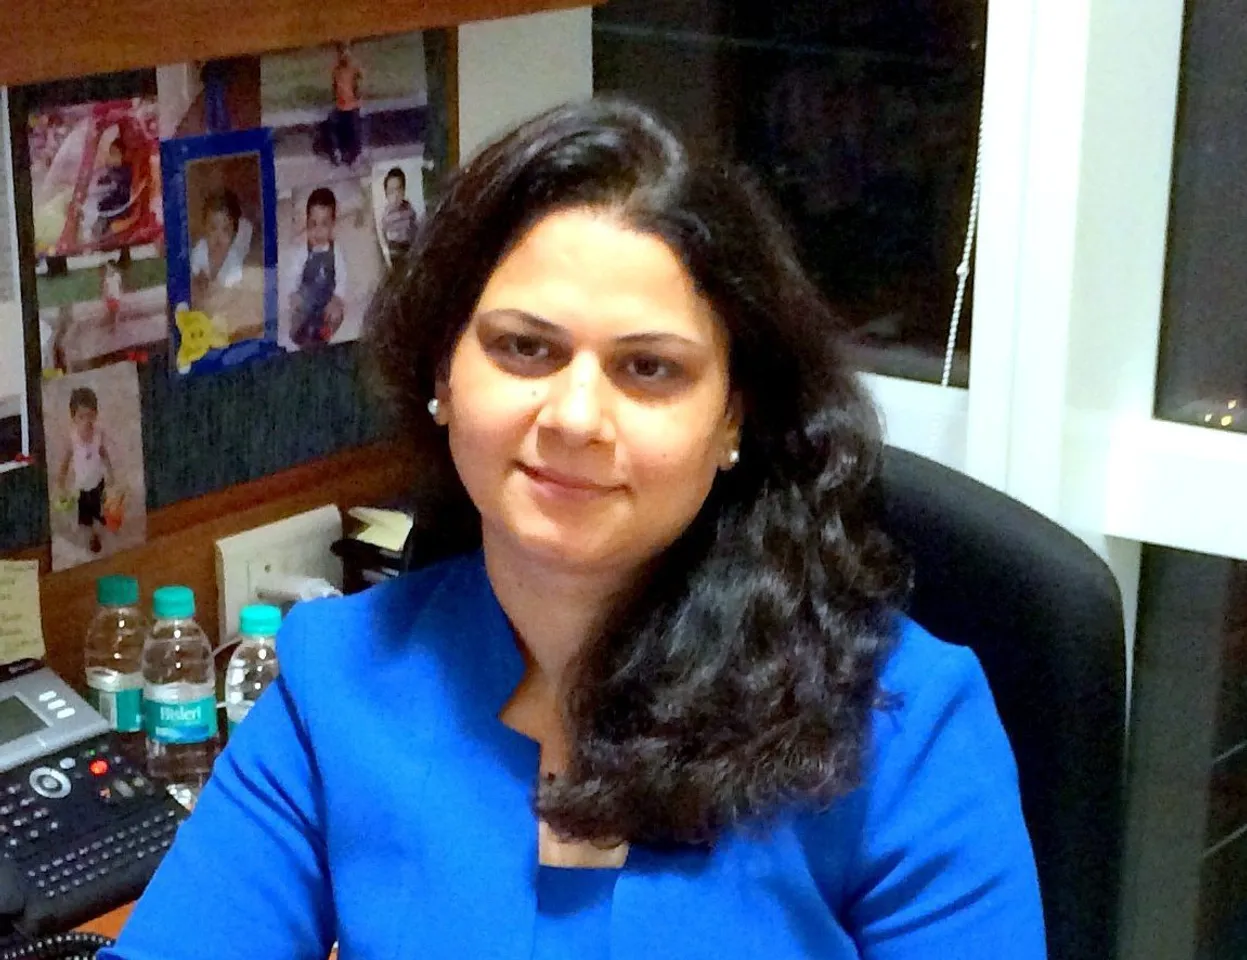   Notorious for livening up the somber world of a law-firm: Khaitan & Co's Kalpana Unadkat